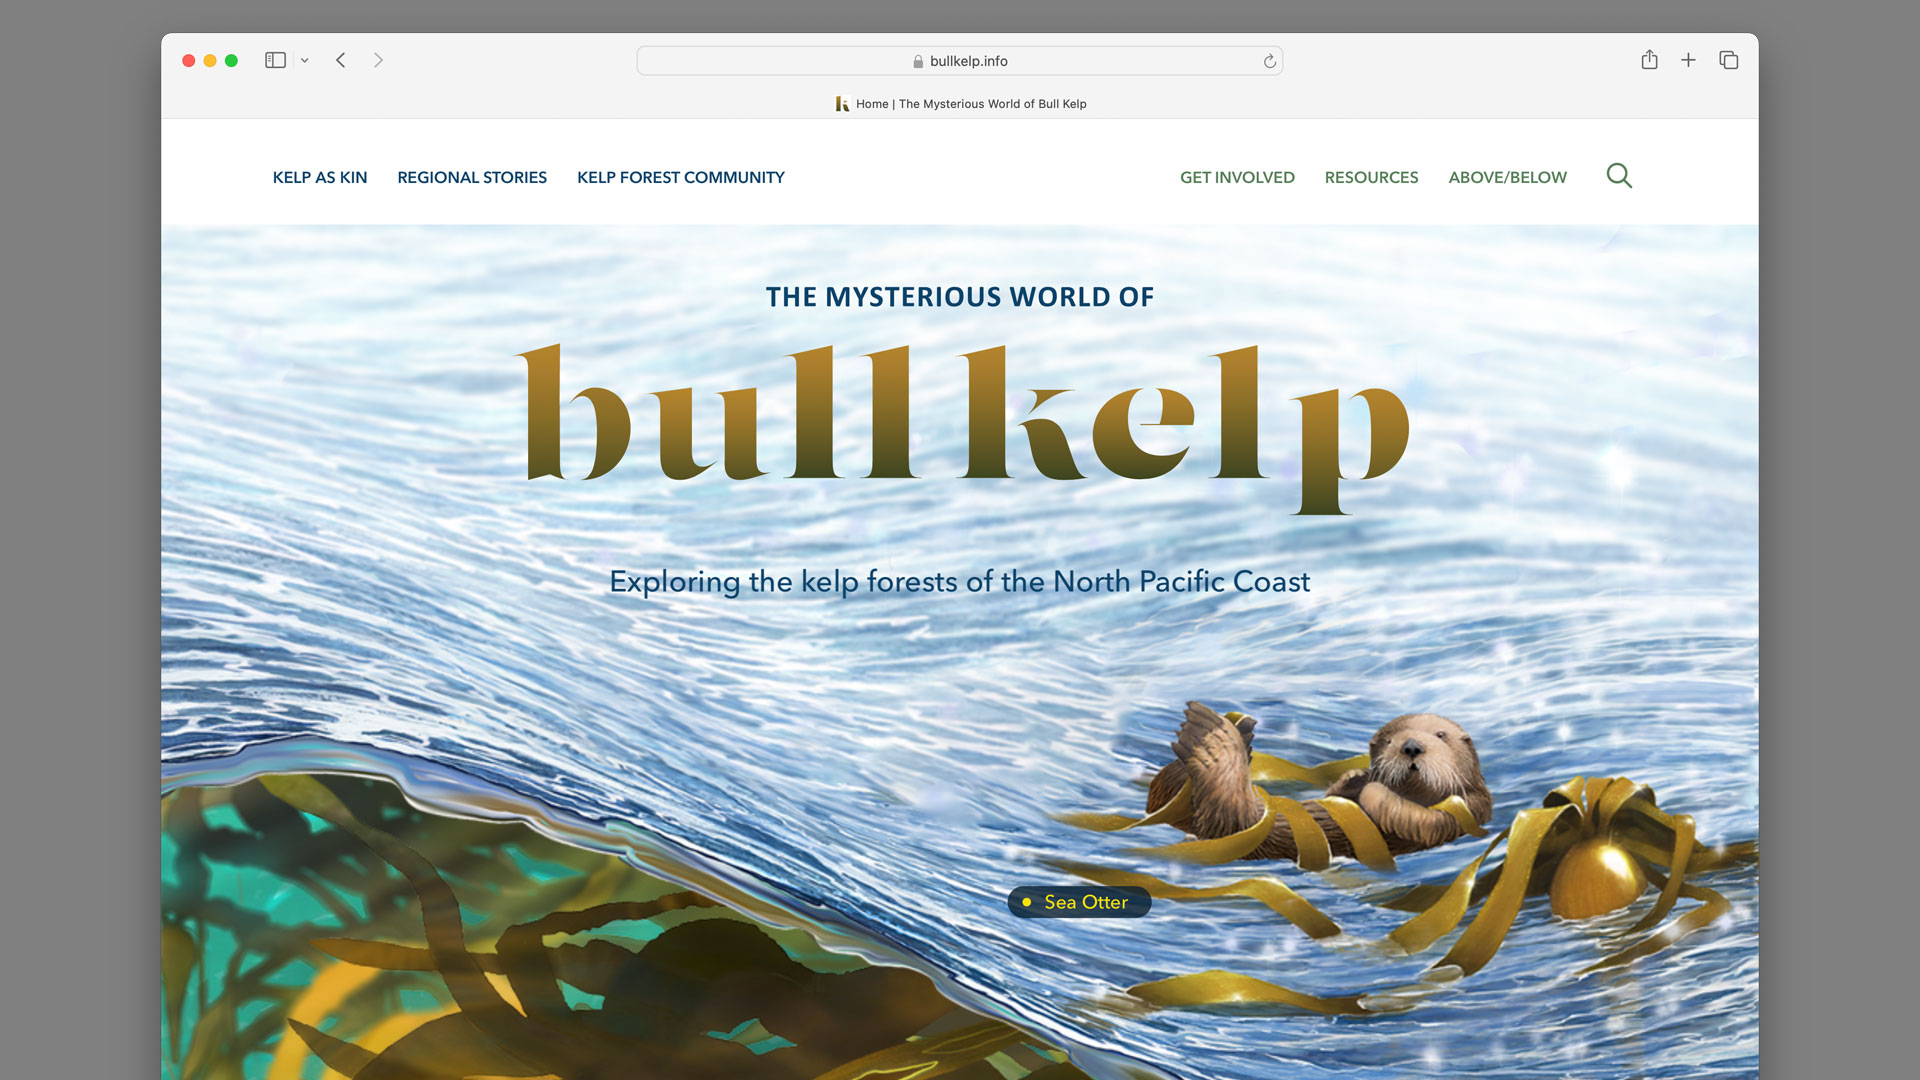 Screen shot of home page of bullkelp.info website with project logotype and illustration of sea otter floating in waves above kelp forest.